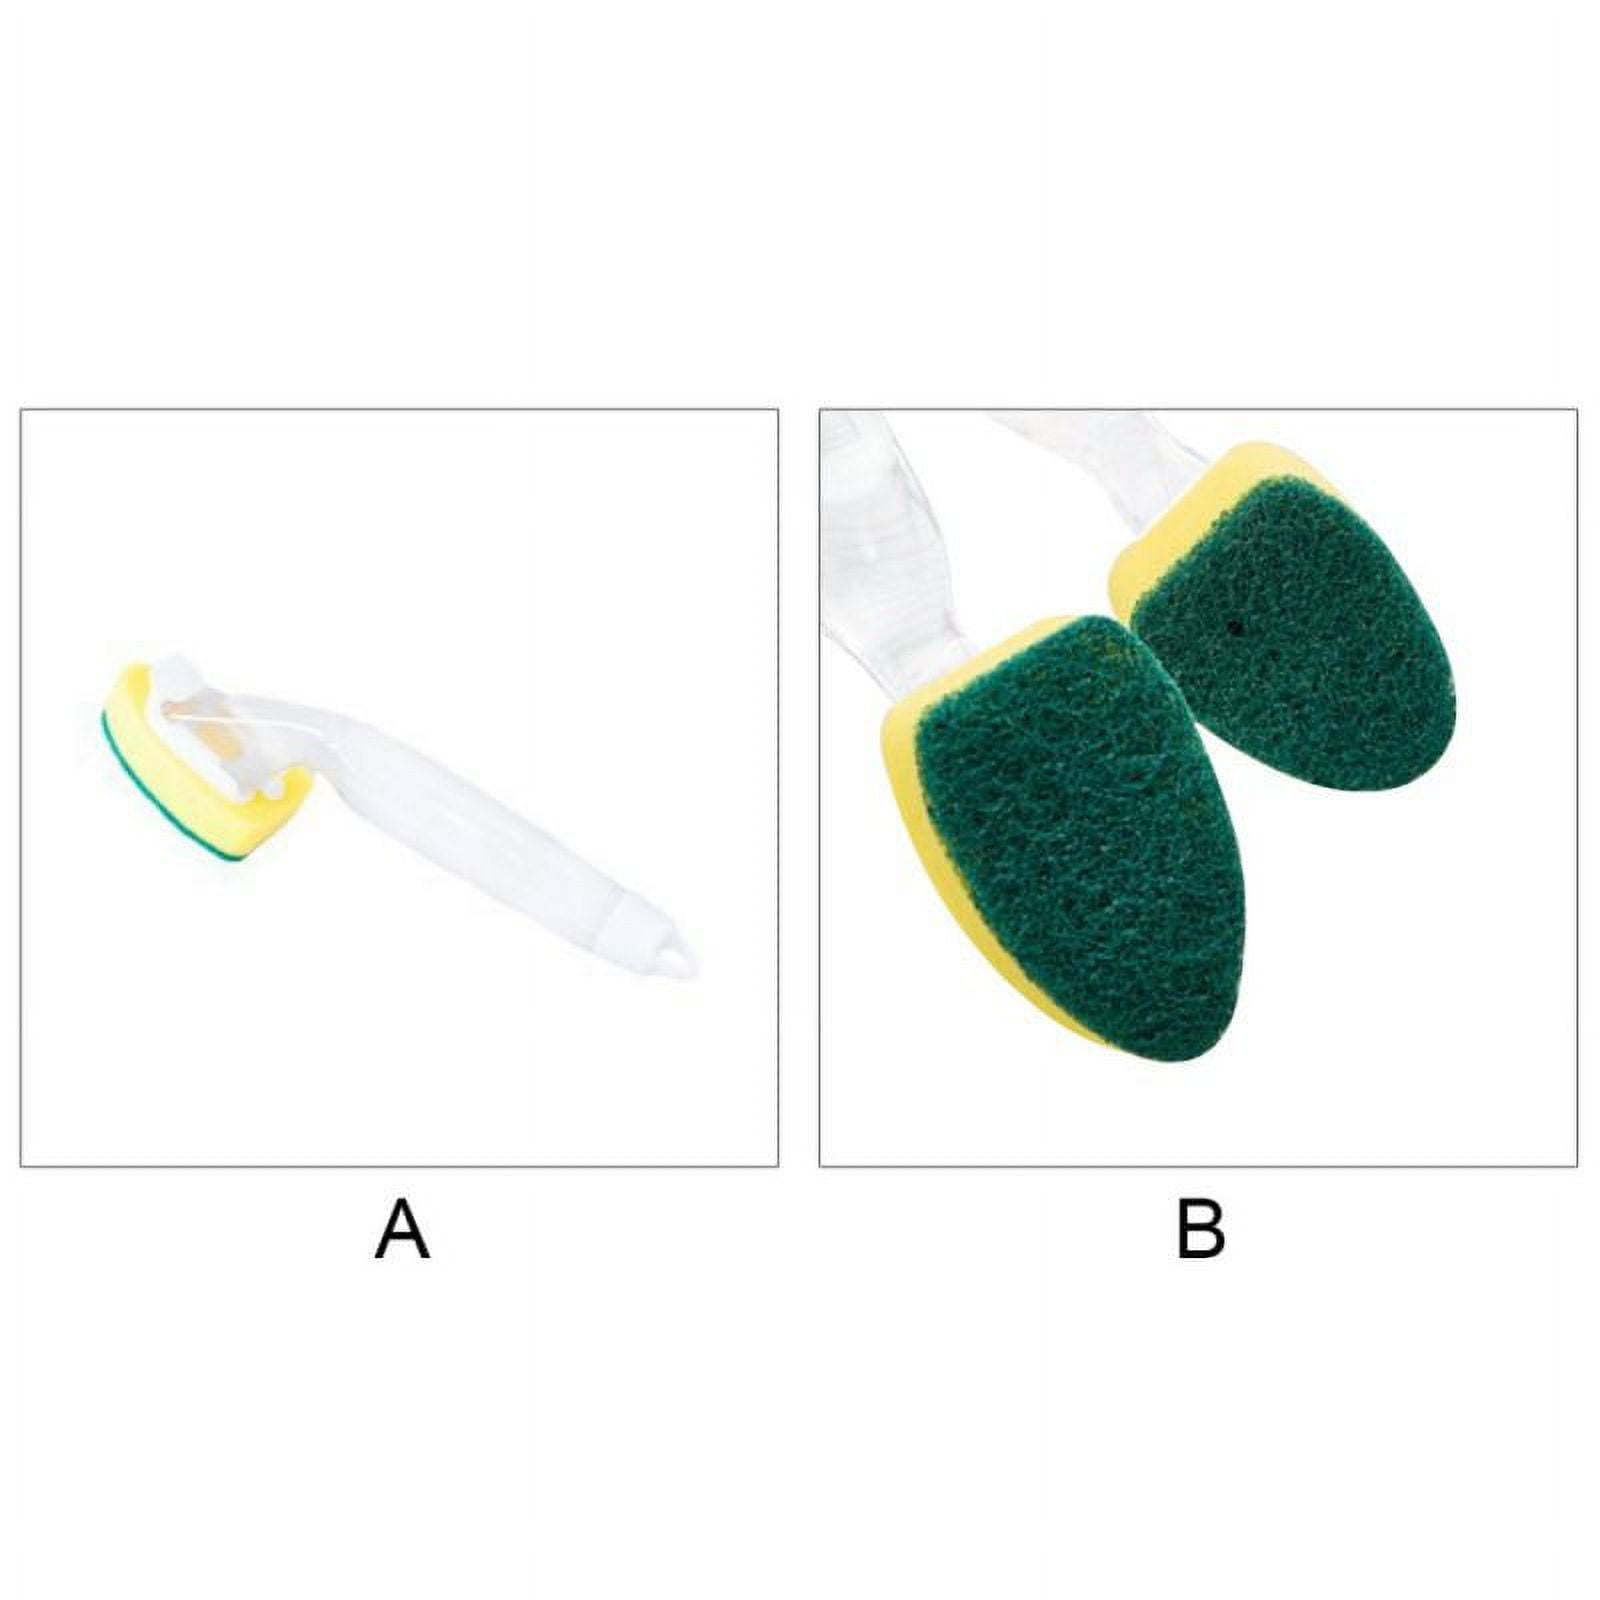 CleanWand Sponge & Brush Set - Perfect for Kitchen Cleaning